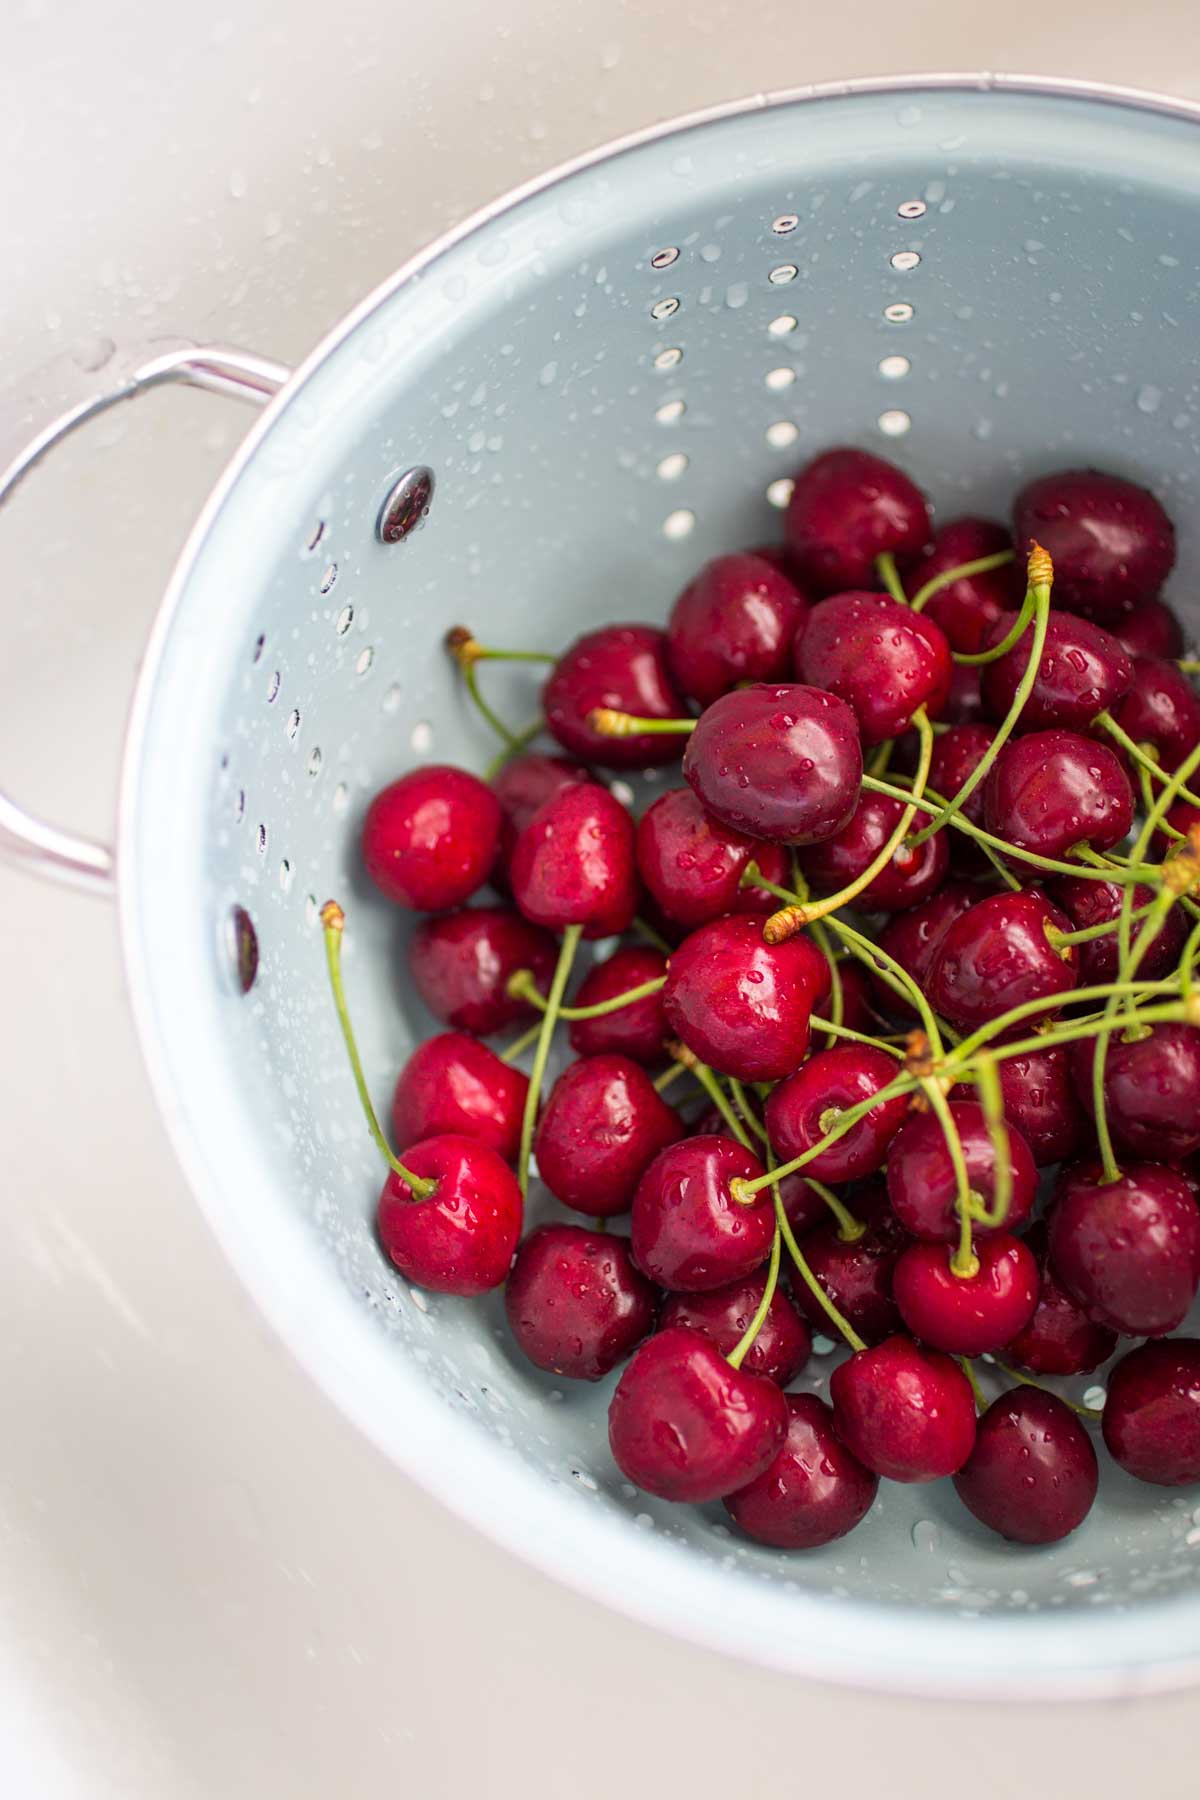 Rinse the cherries in a collander.